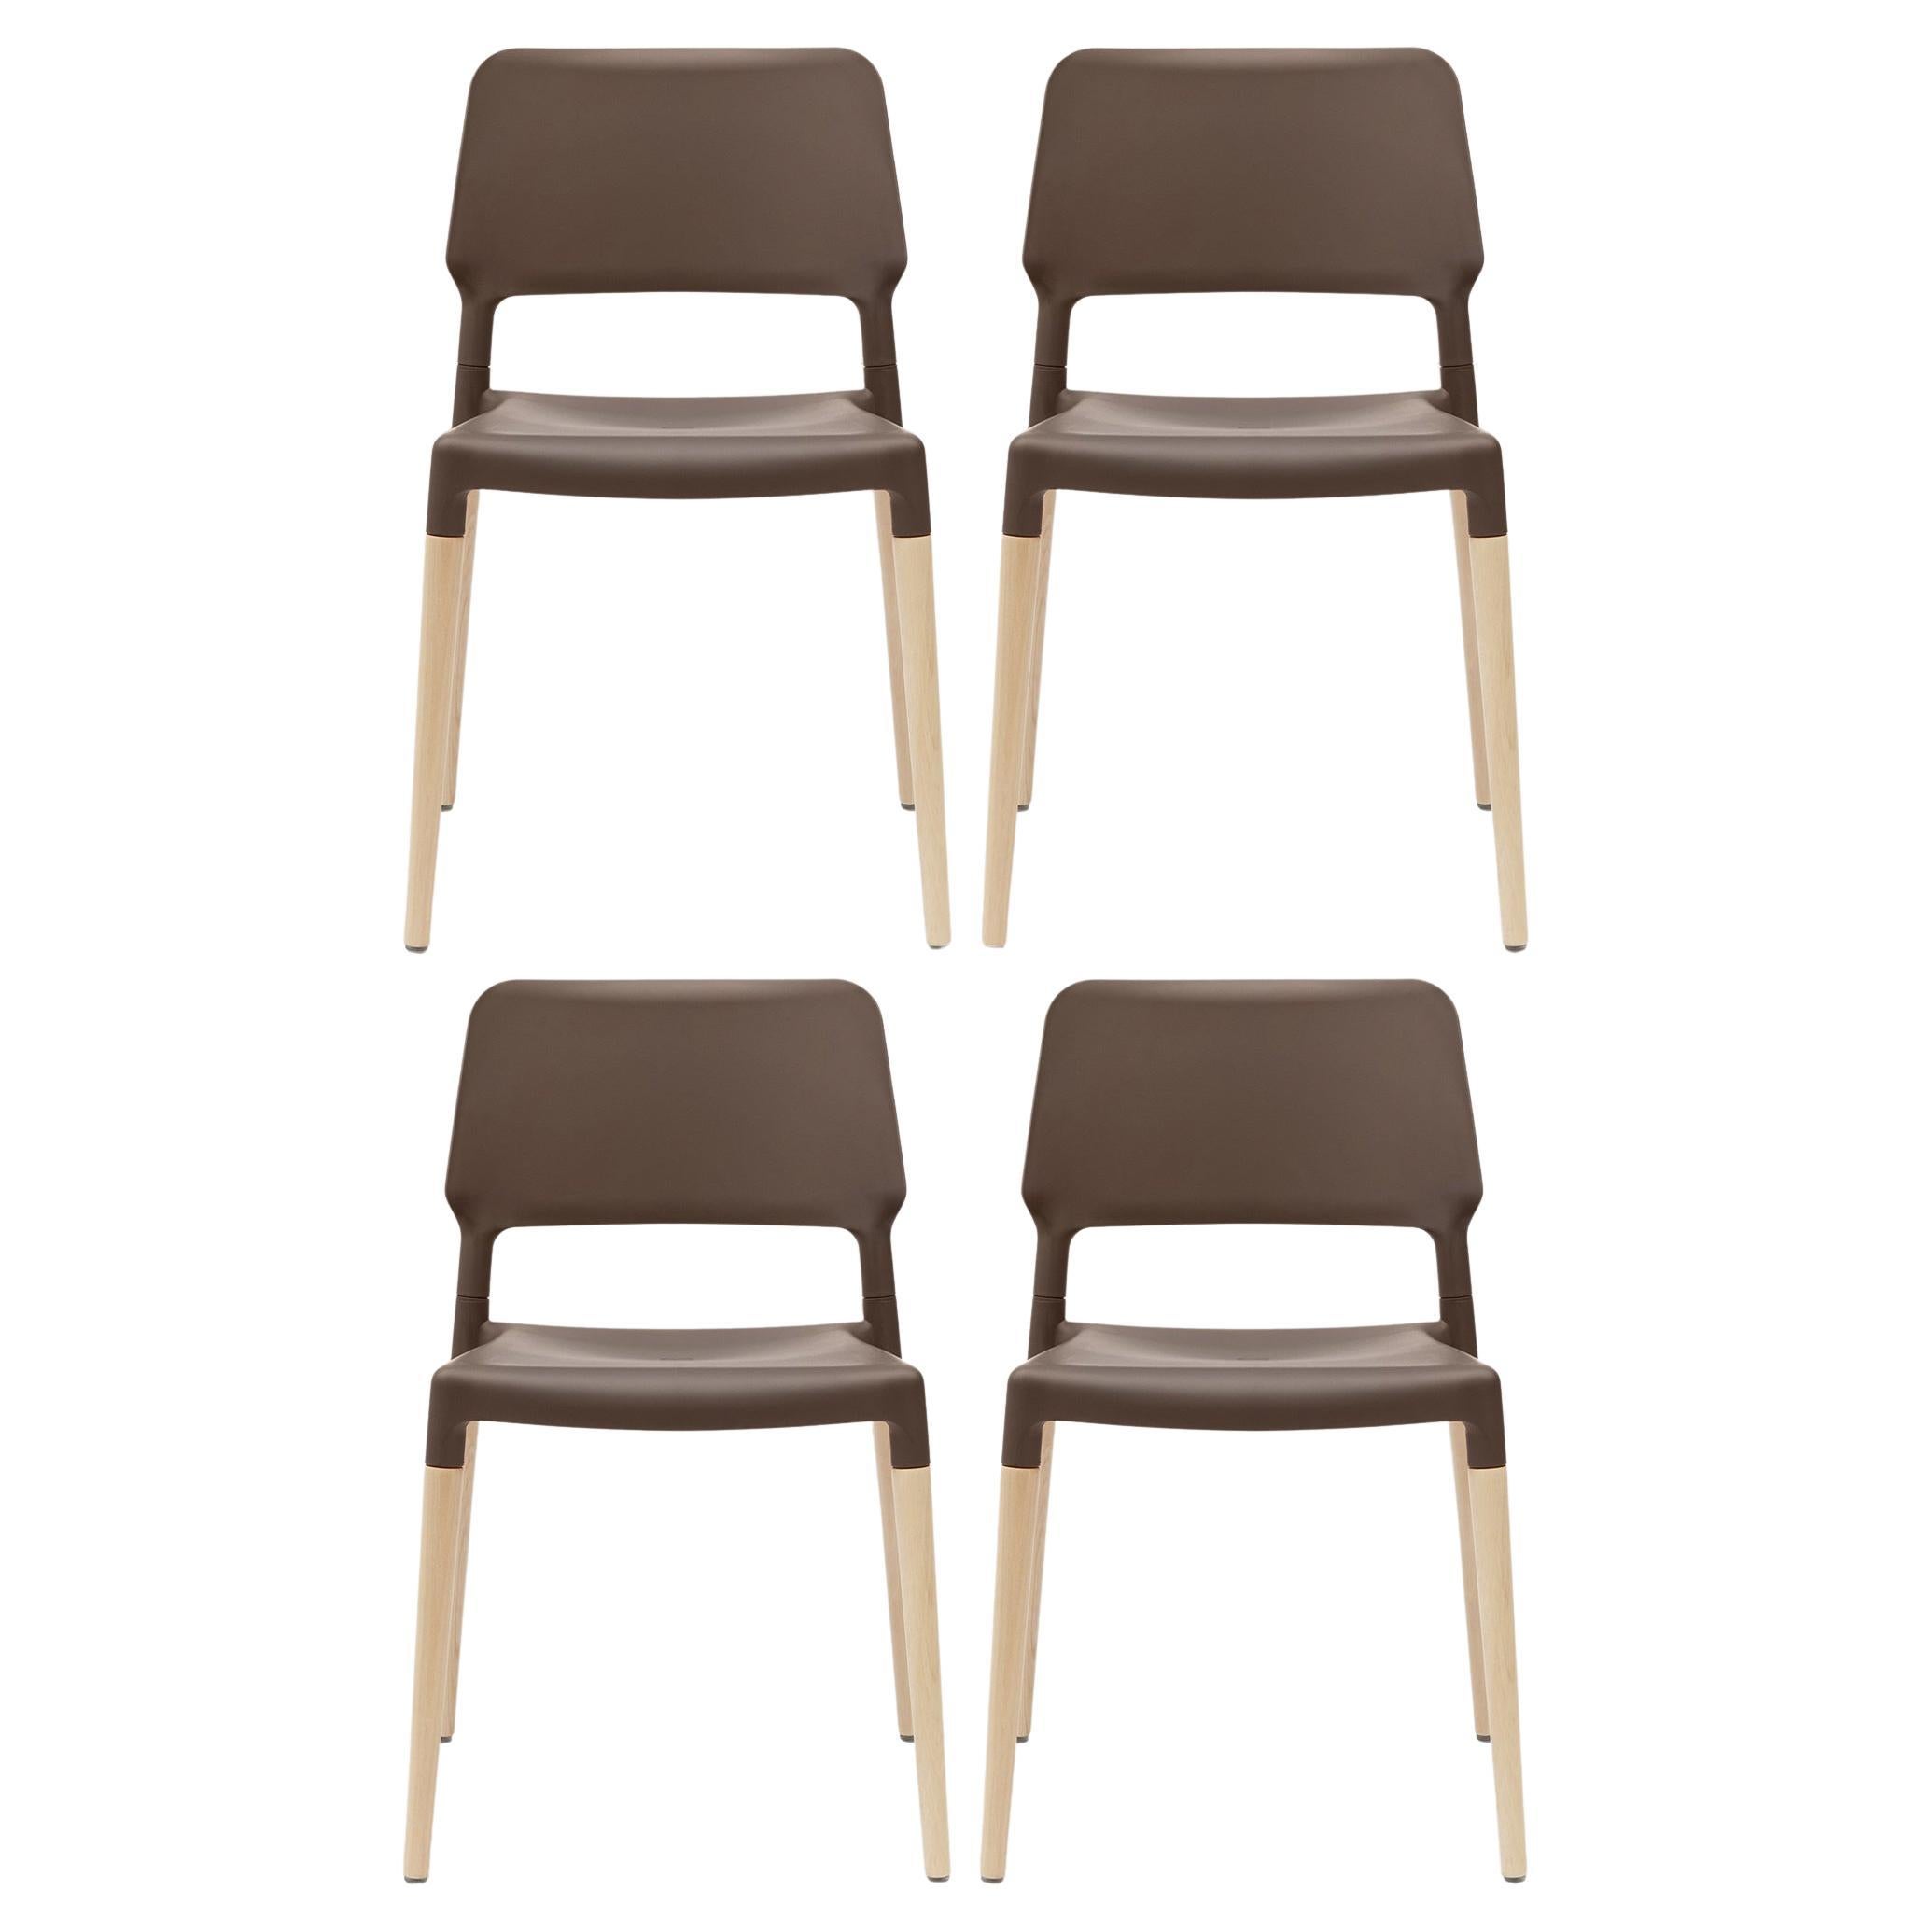 Set of 4 Belloch Dining Chair by Lagranja Design